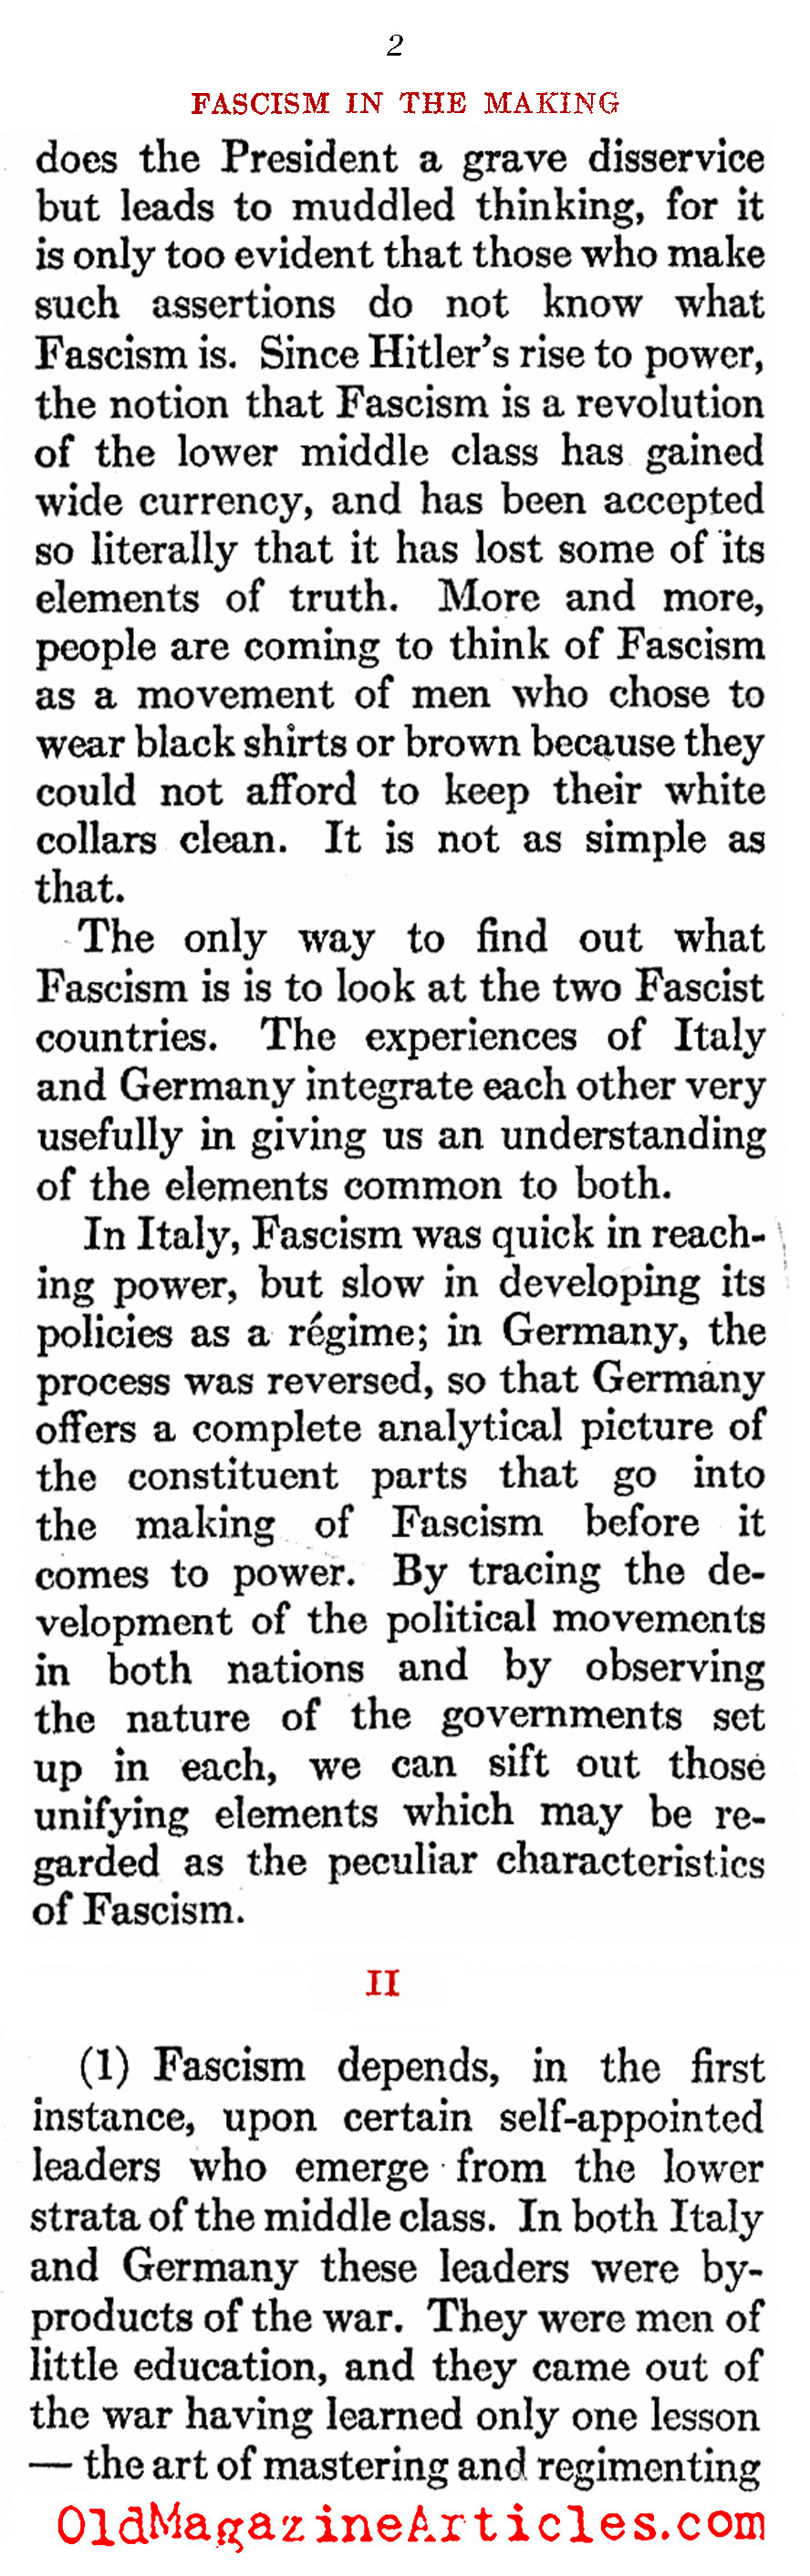 ''The New Deal Was Not Fascist''  (The Atlantic Monthly, 1933)